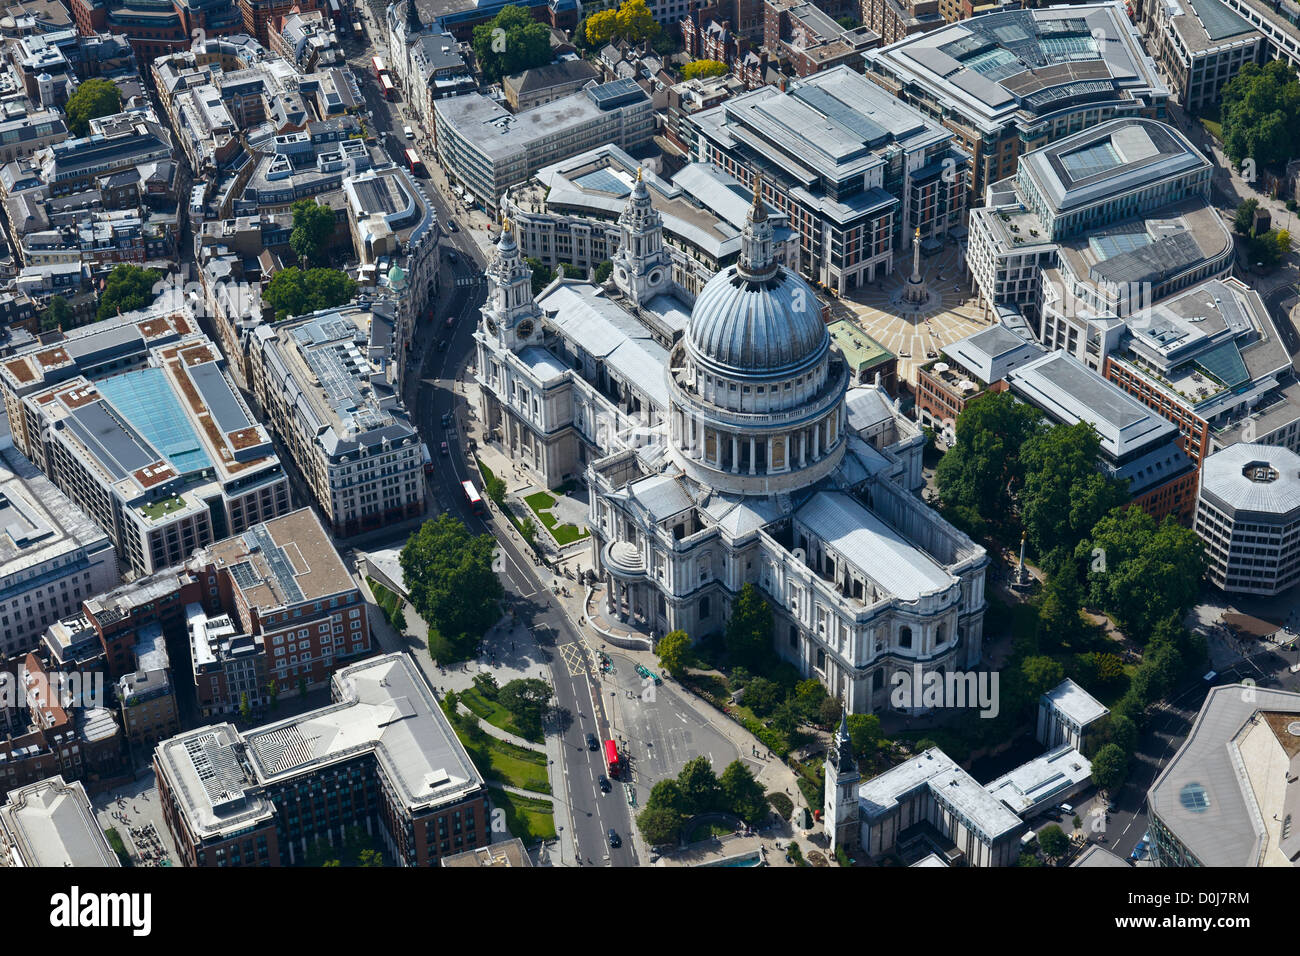 Aerial view of St Paul's Cathedral and surrounding area in London. Stock Photo